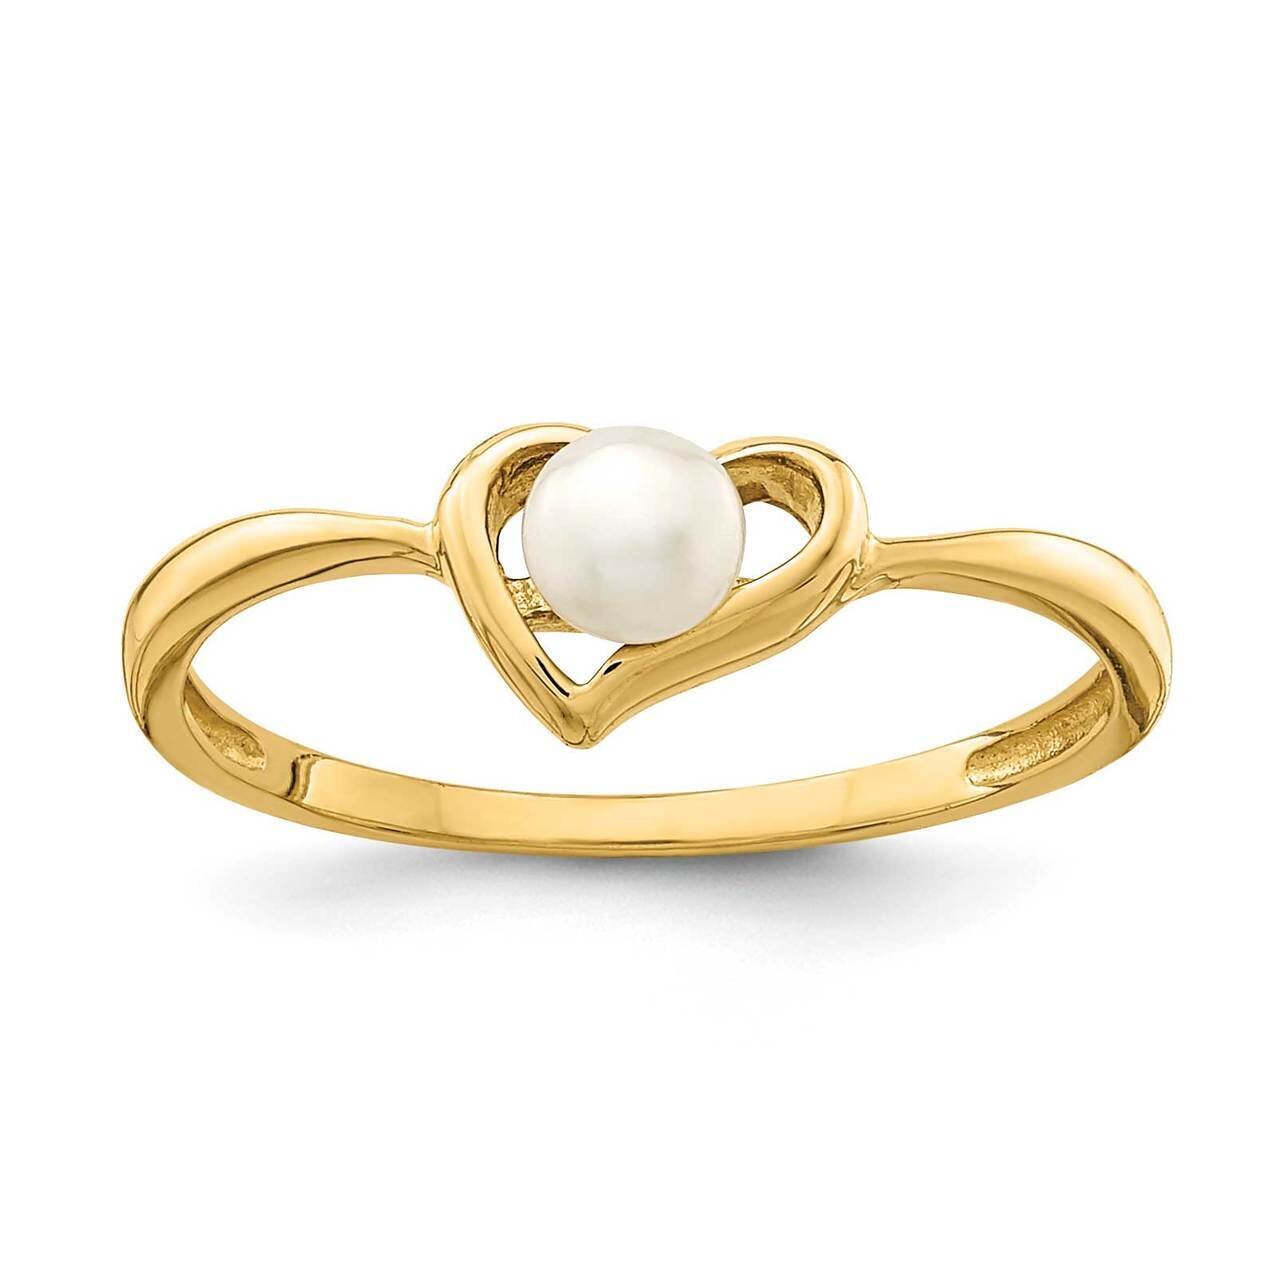 3-4mm White Button Freshwater Cultured Pearl Heart Ring 14k Gold SE2880